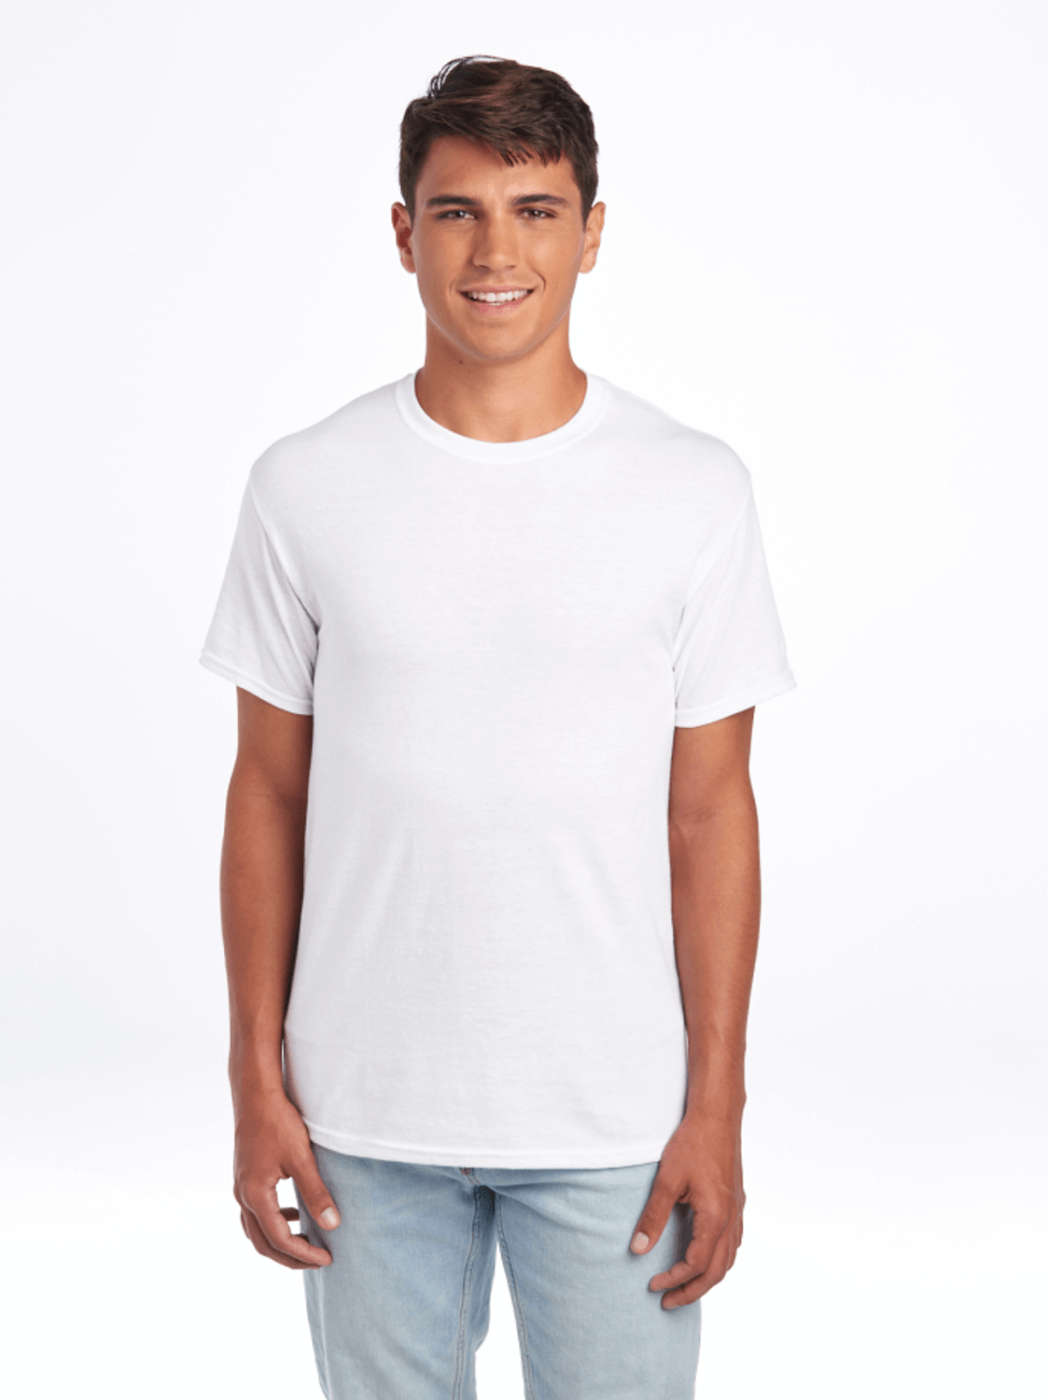 Blank Wholesale T-shirts Vancouver